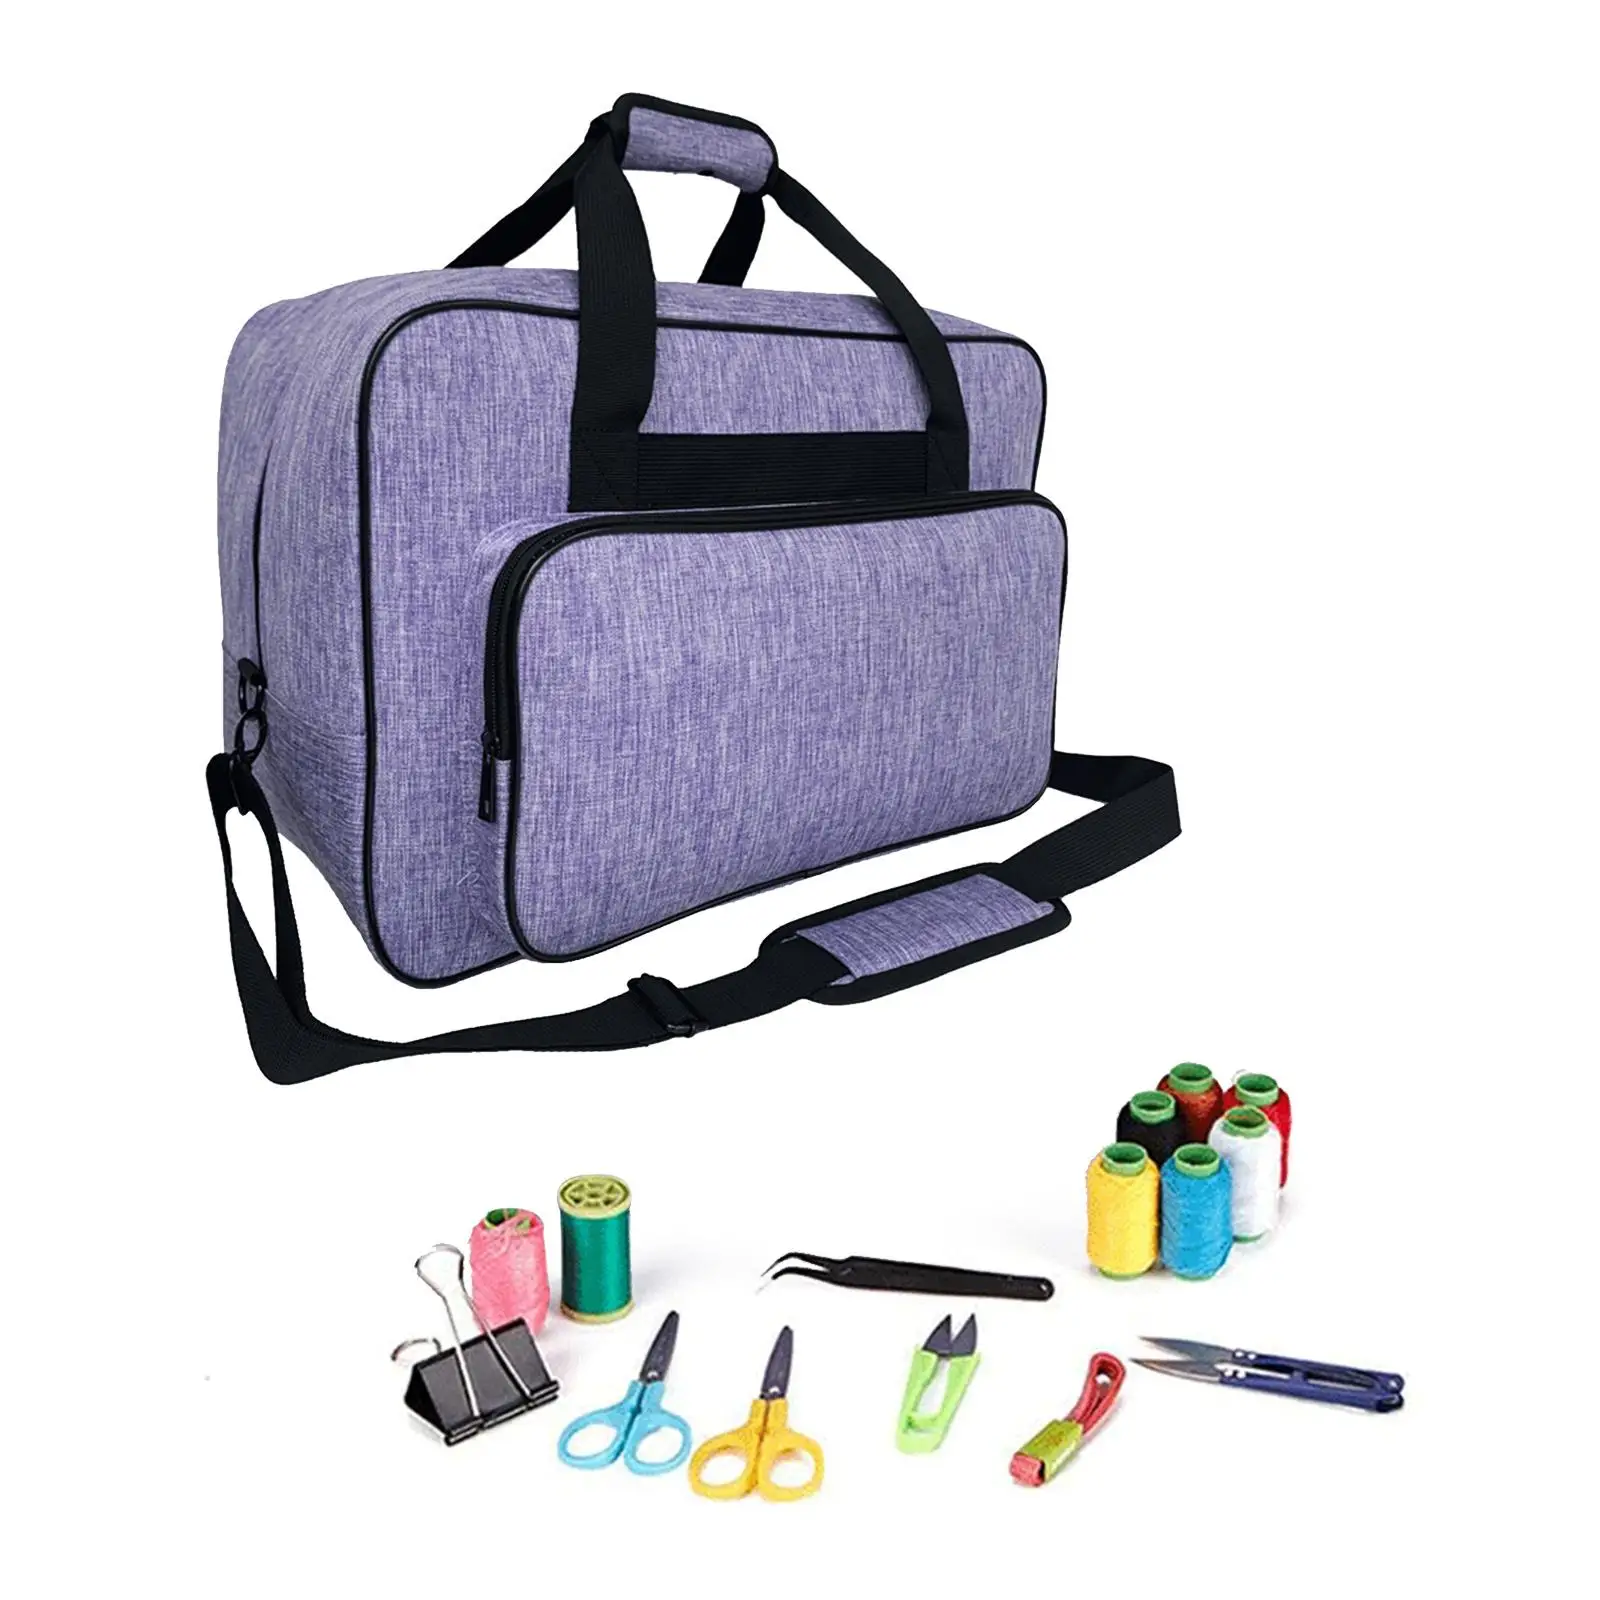 Sewing Machine Carrying Case, Carry Tote Bag, Portable Storag with Pockets for Sewing Machine Padded Bag